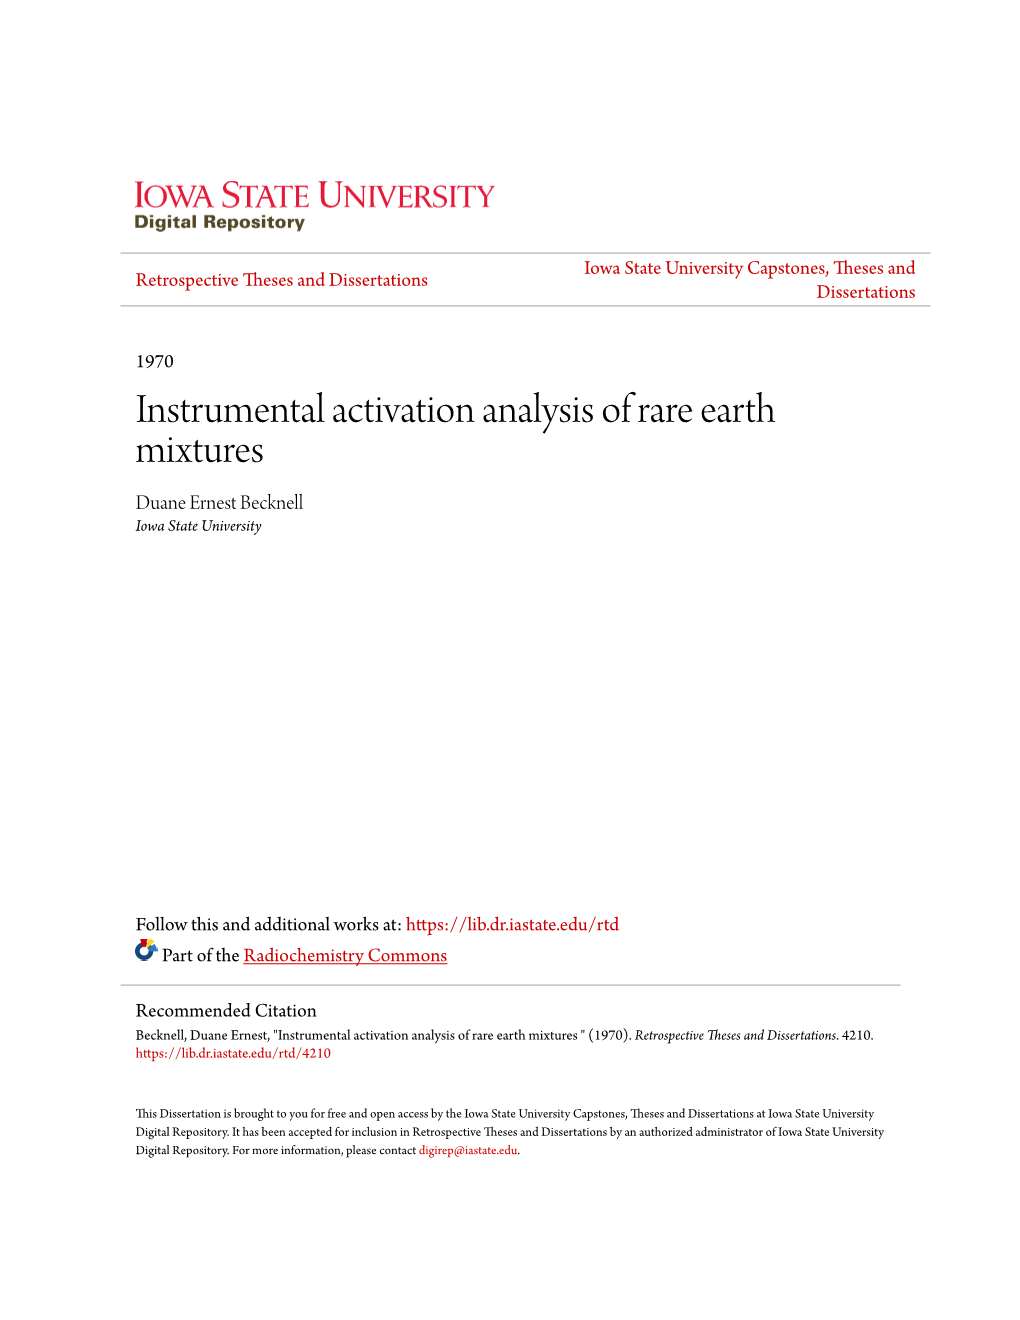 Instrumental Activation Analysis of Rare Earth Mixtures Duane Ernest Becknell Iowa State University